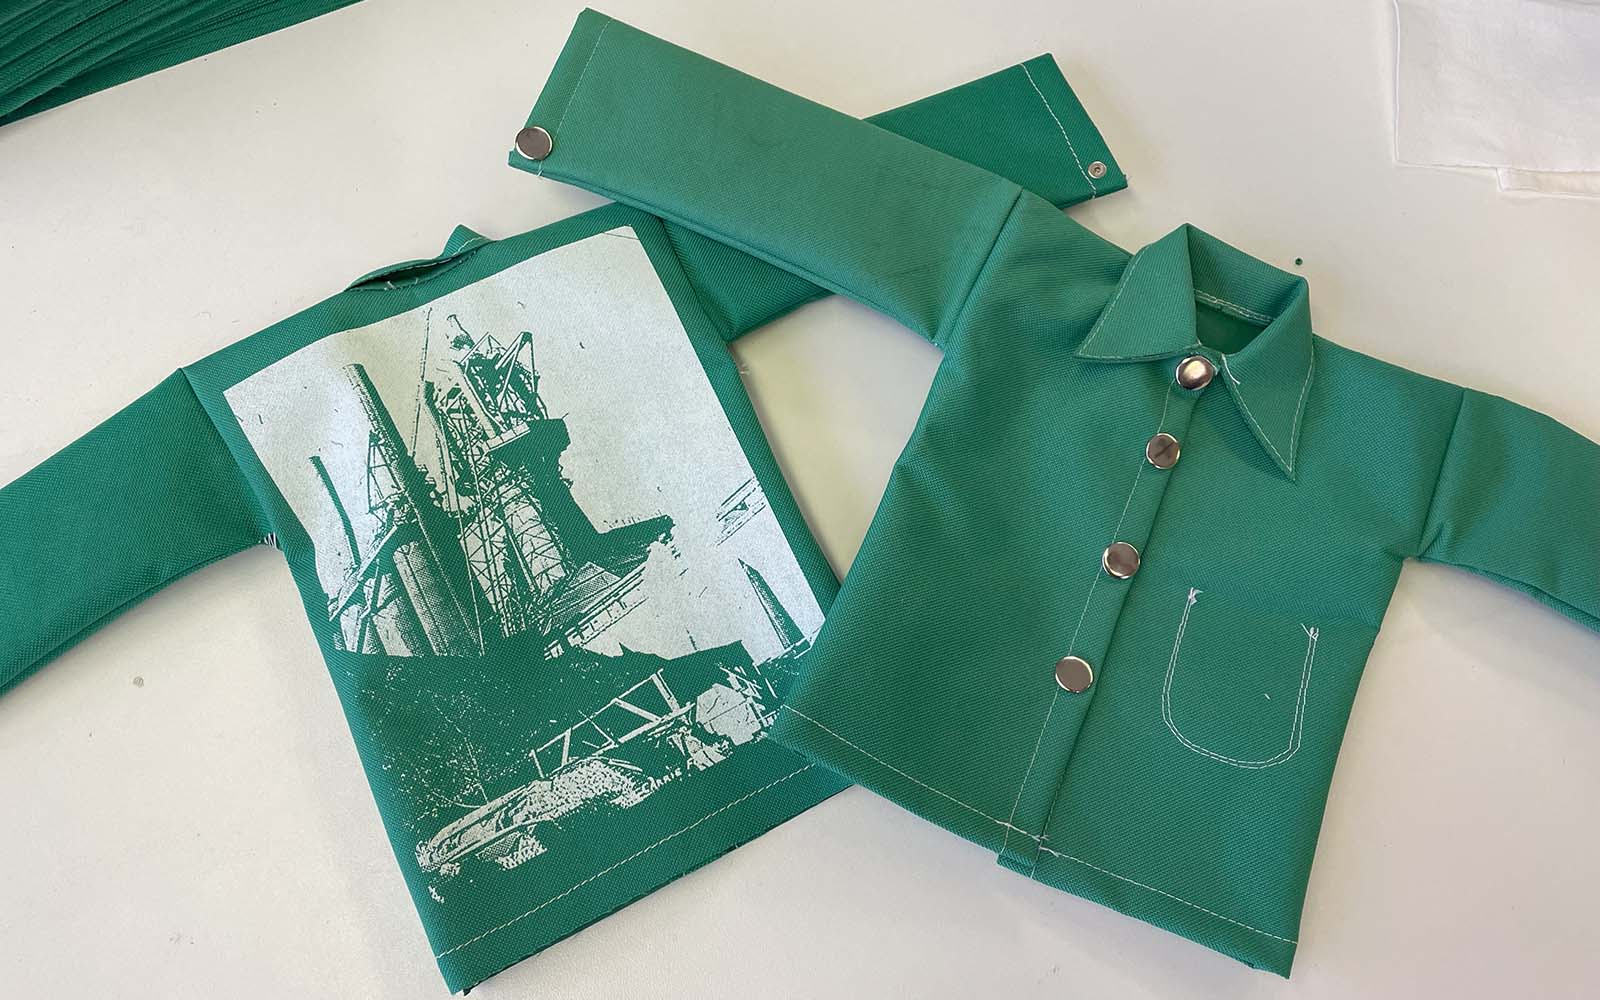 The back and front of a miniature workers jacket known as Greens. The back of the jacket has a silk-screened image of the Carrie Furnaces on it.